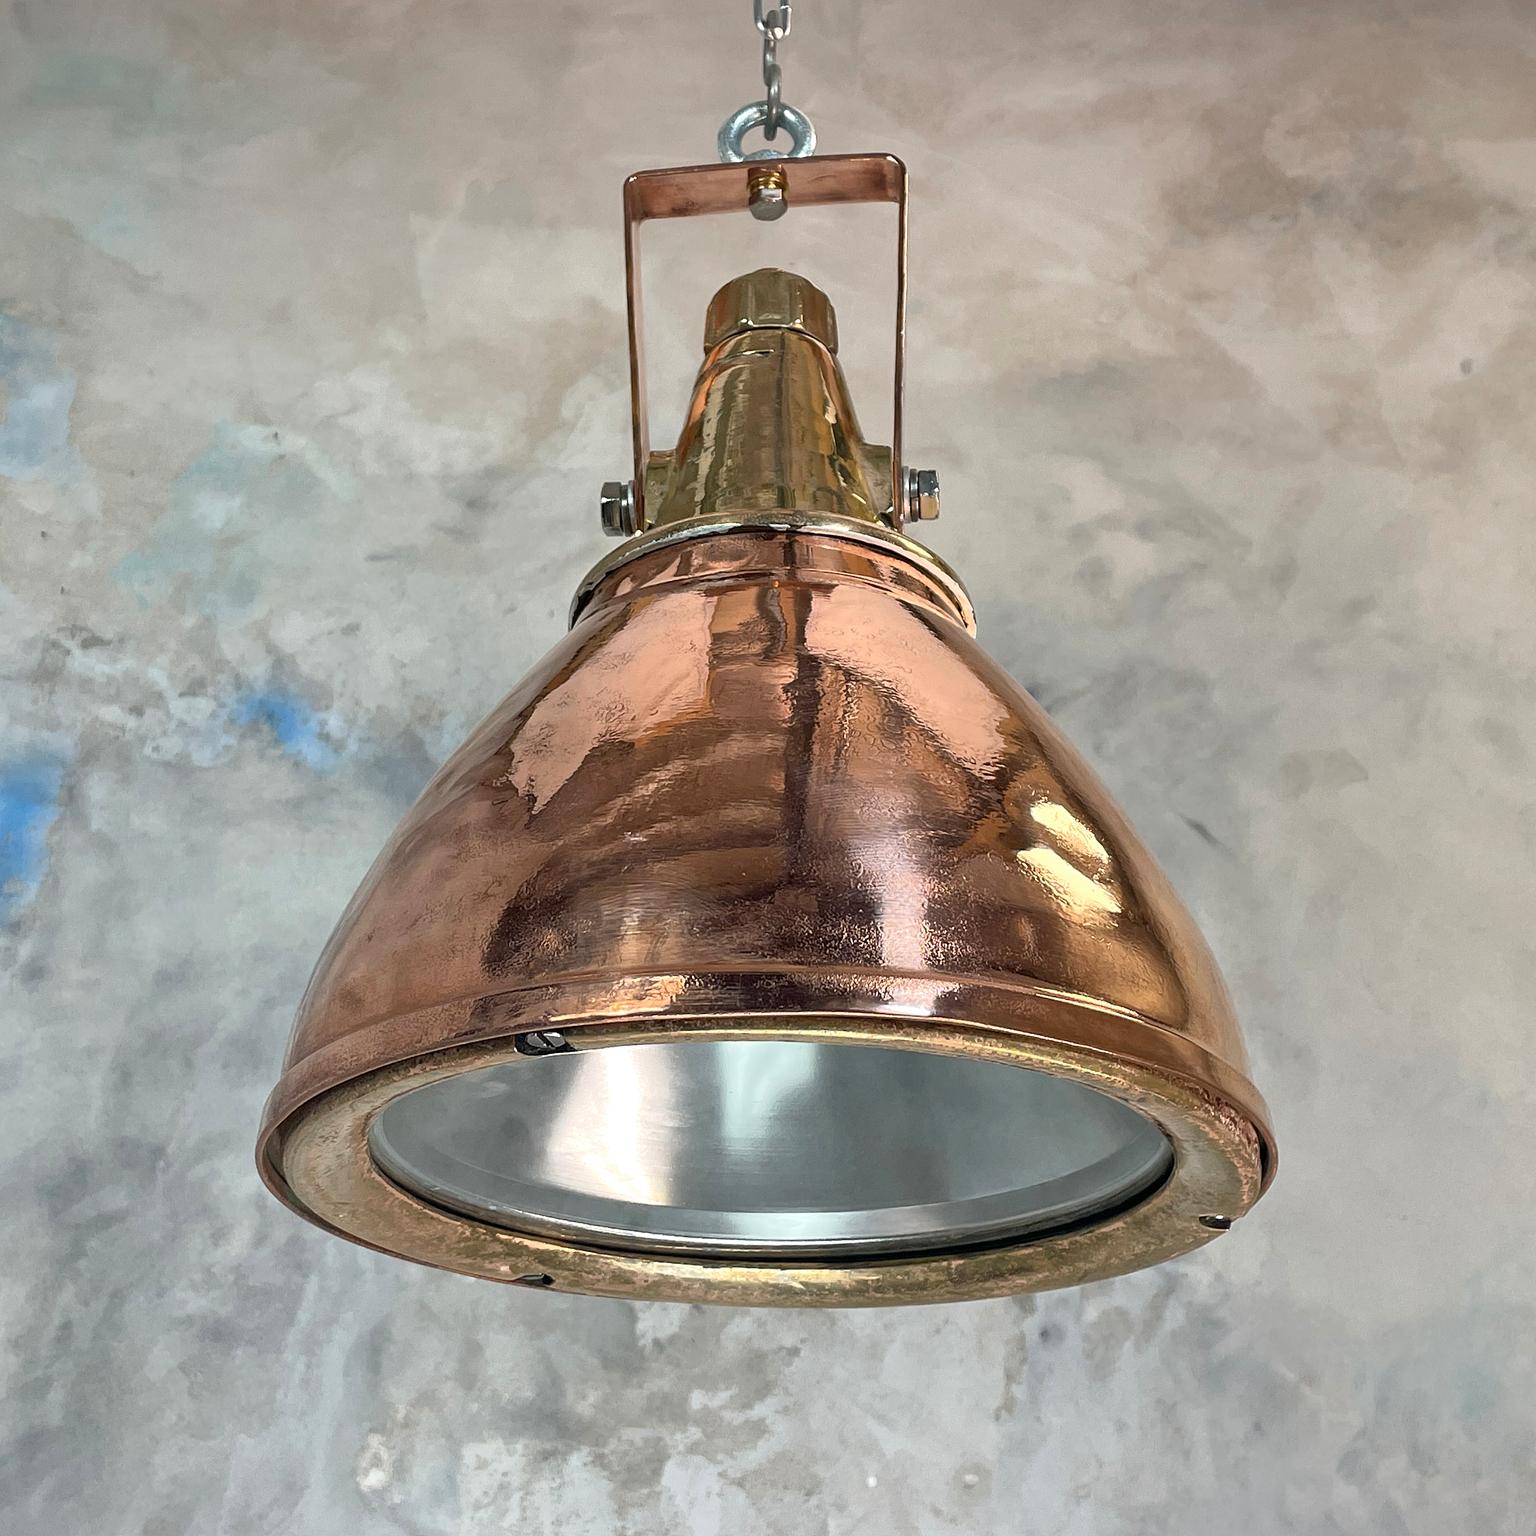 Late 20th Century 1970s German Copper & Brass Industrial Ceiling Pendant Light with Beam Focus